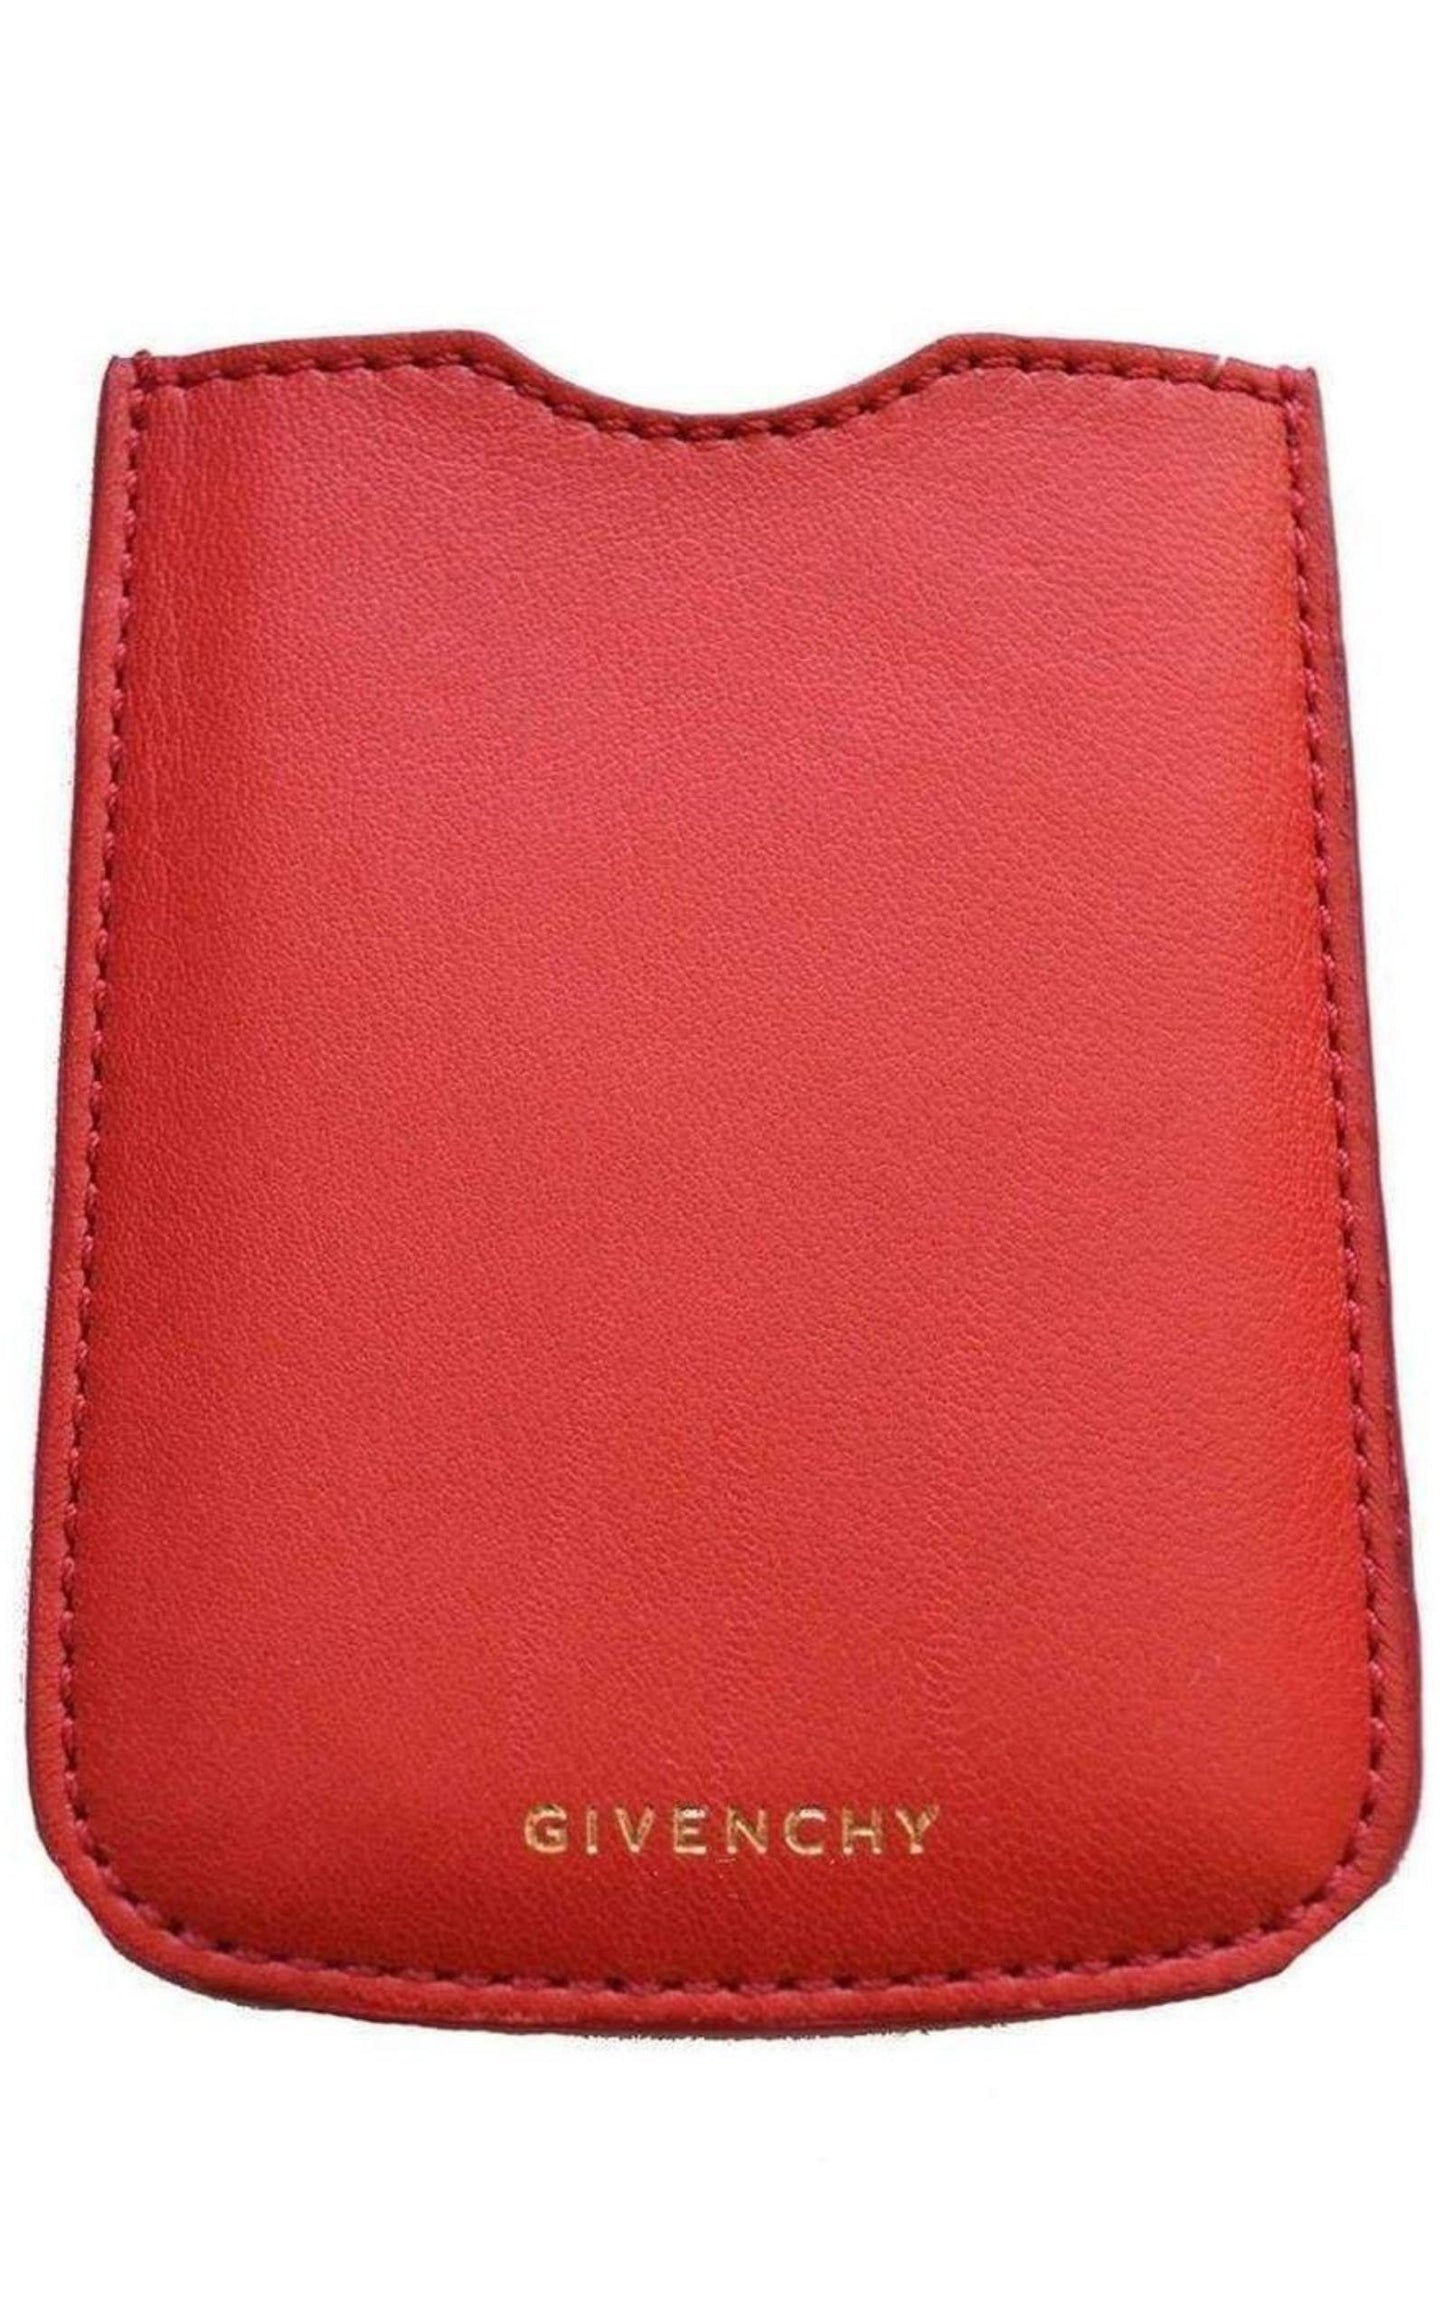  GivenchyGivenchy Red Leather Phone or Credit Card Case - Runway Catalog